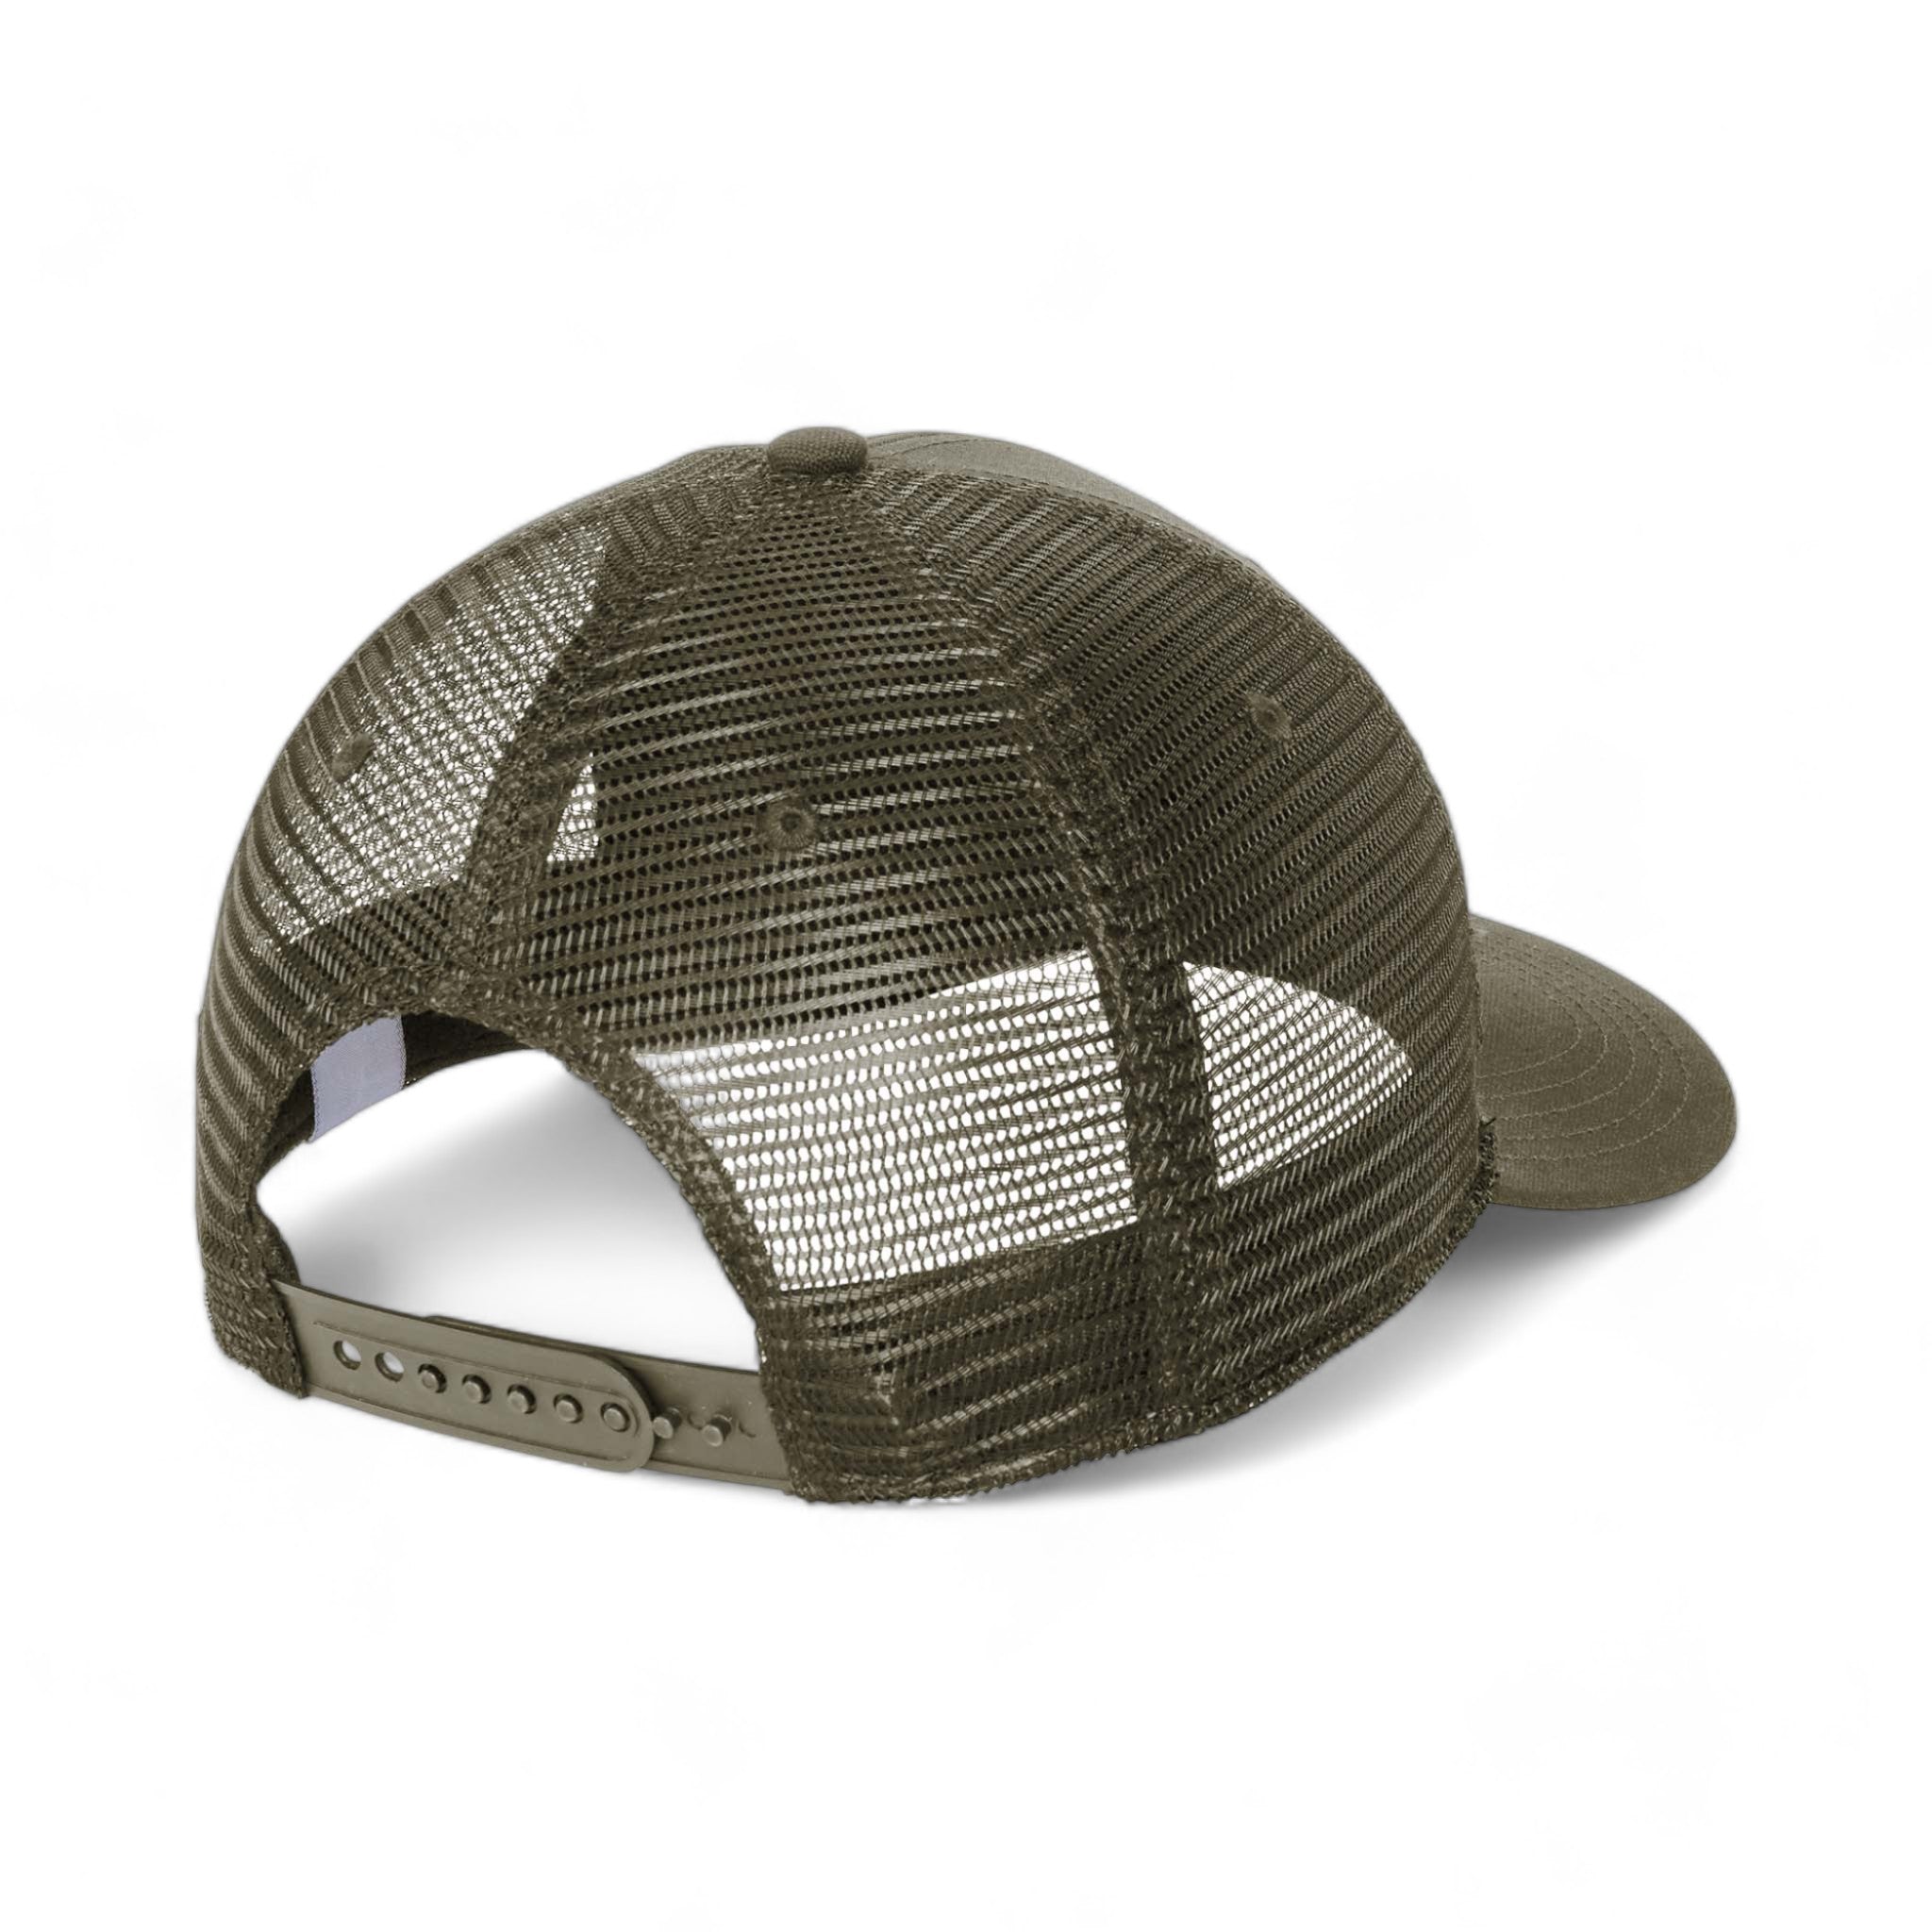 Back view of Carhartt CT105298 custom hat in moss